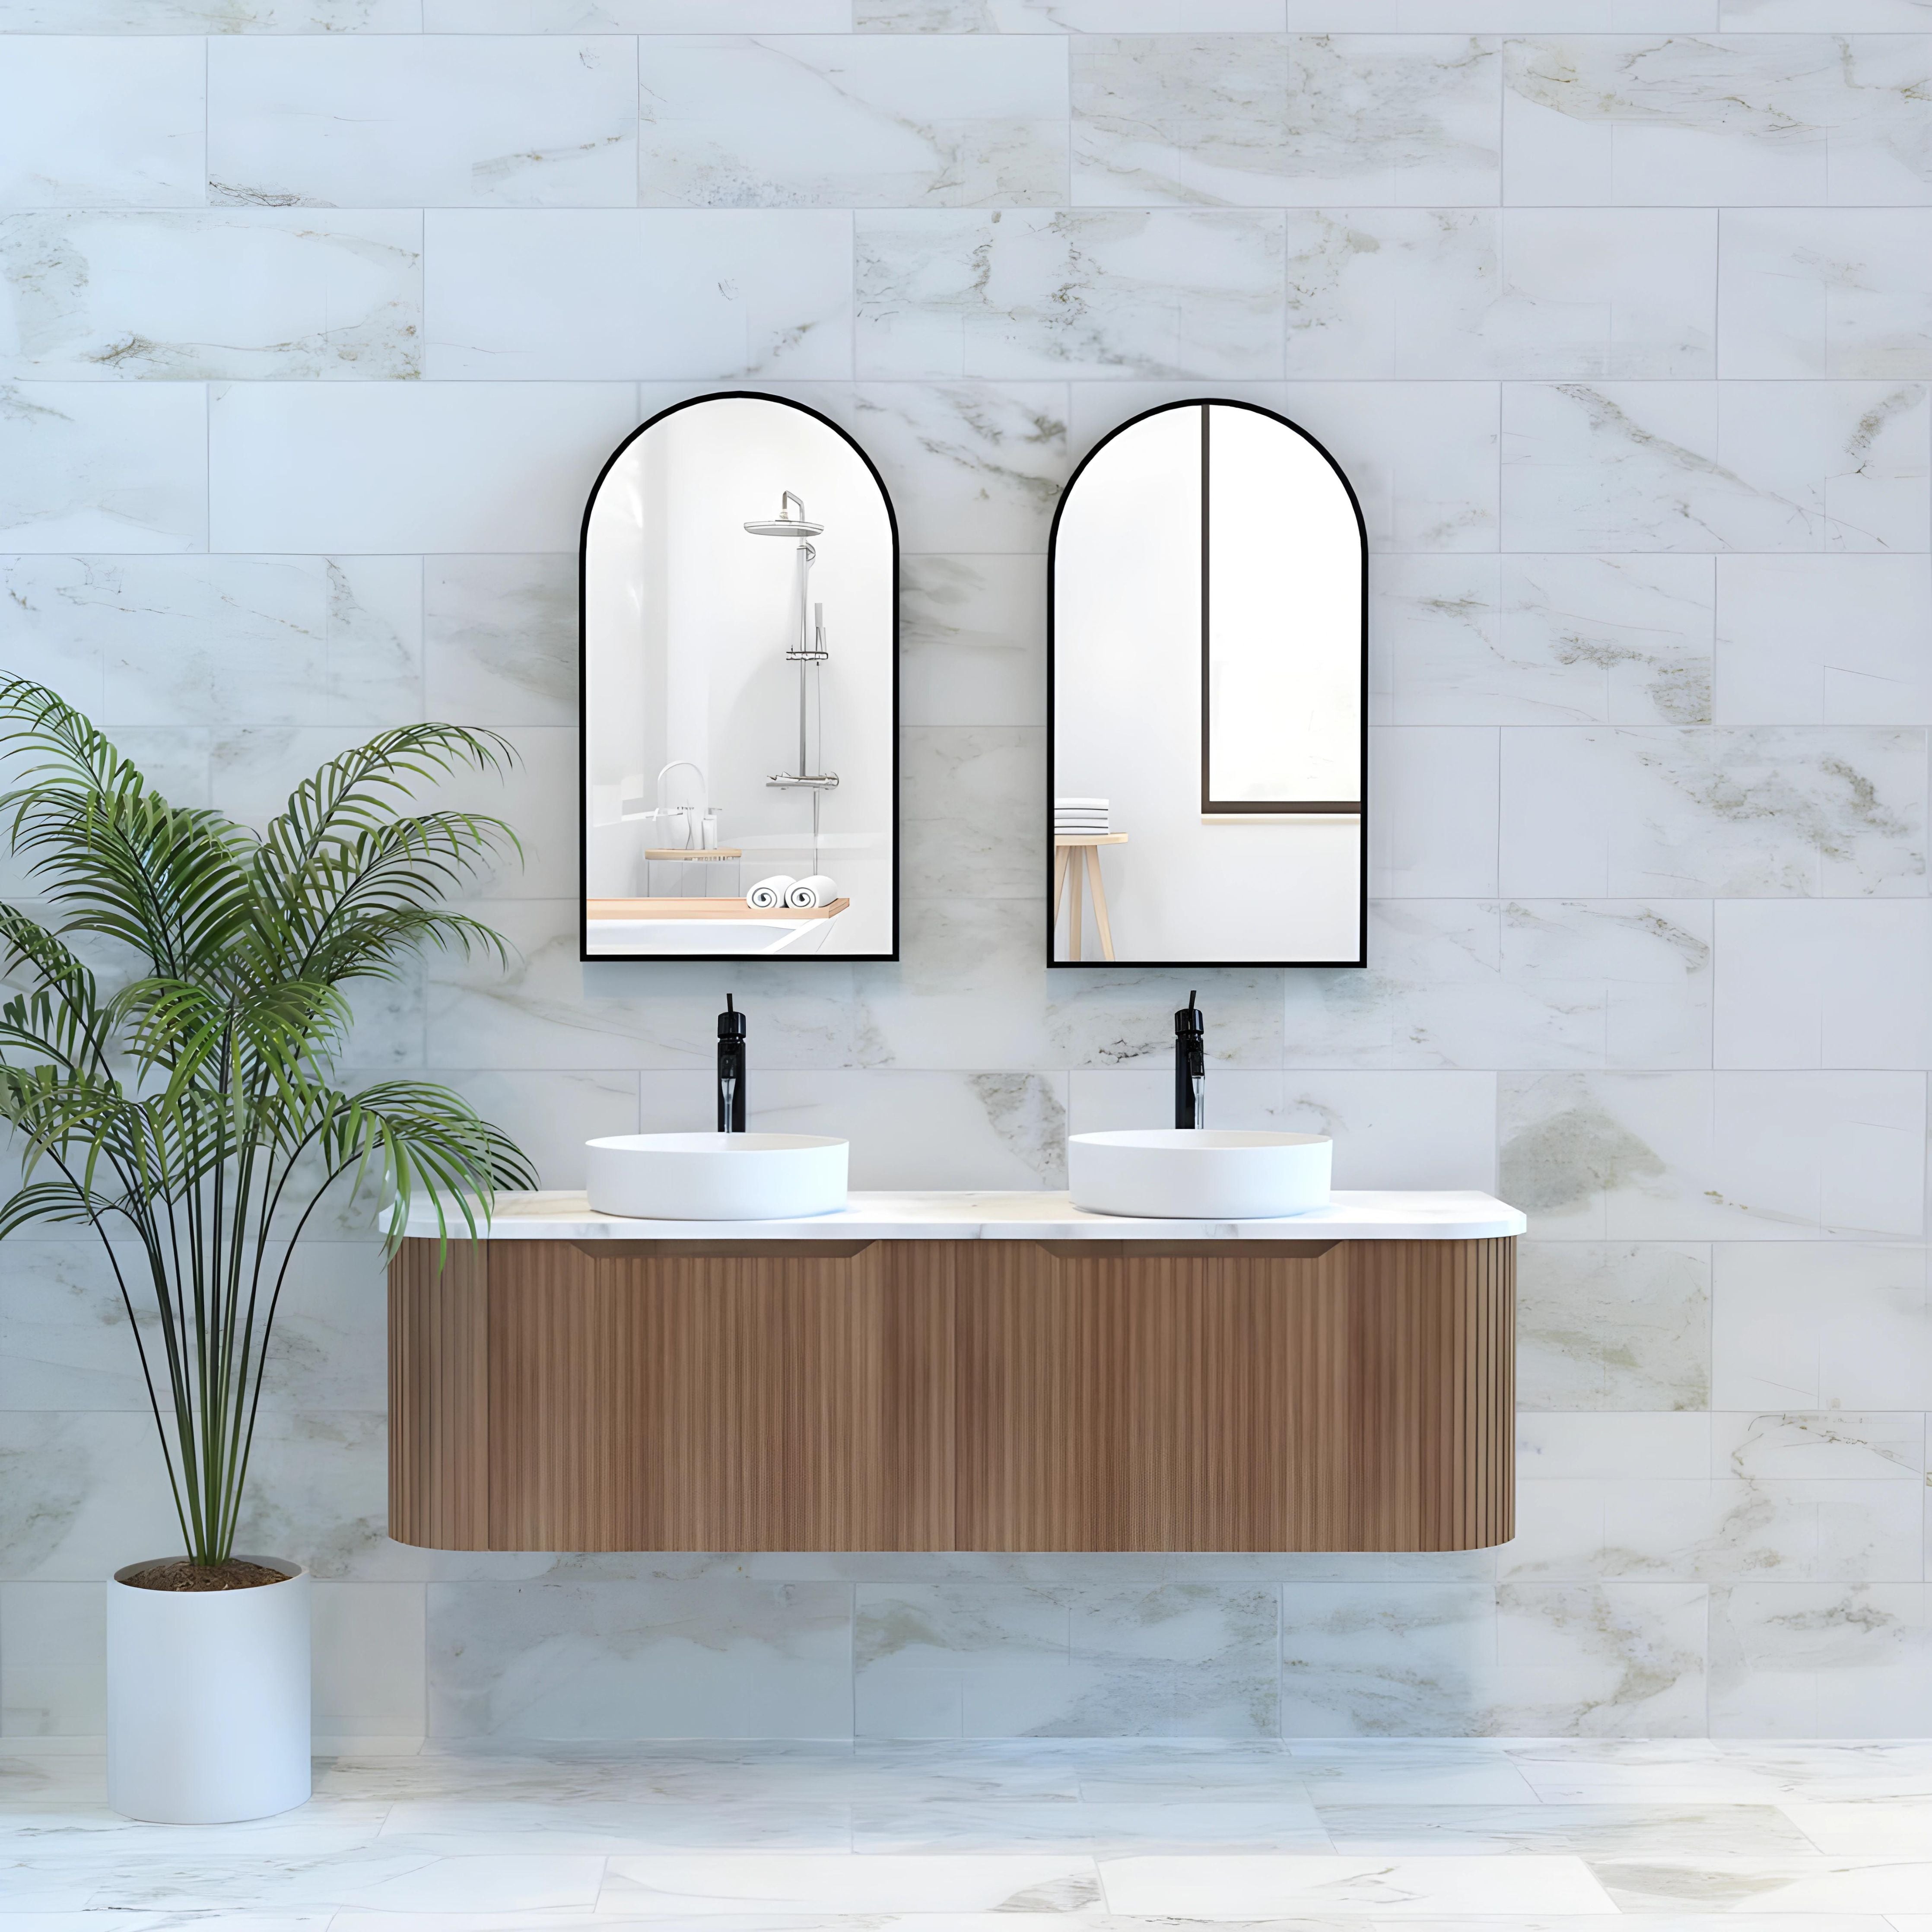 RIVA BERGEN SOLID TIMBER 1500MM DOUBLE BOWL WALL HUNG VANITY